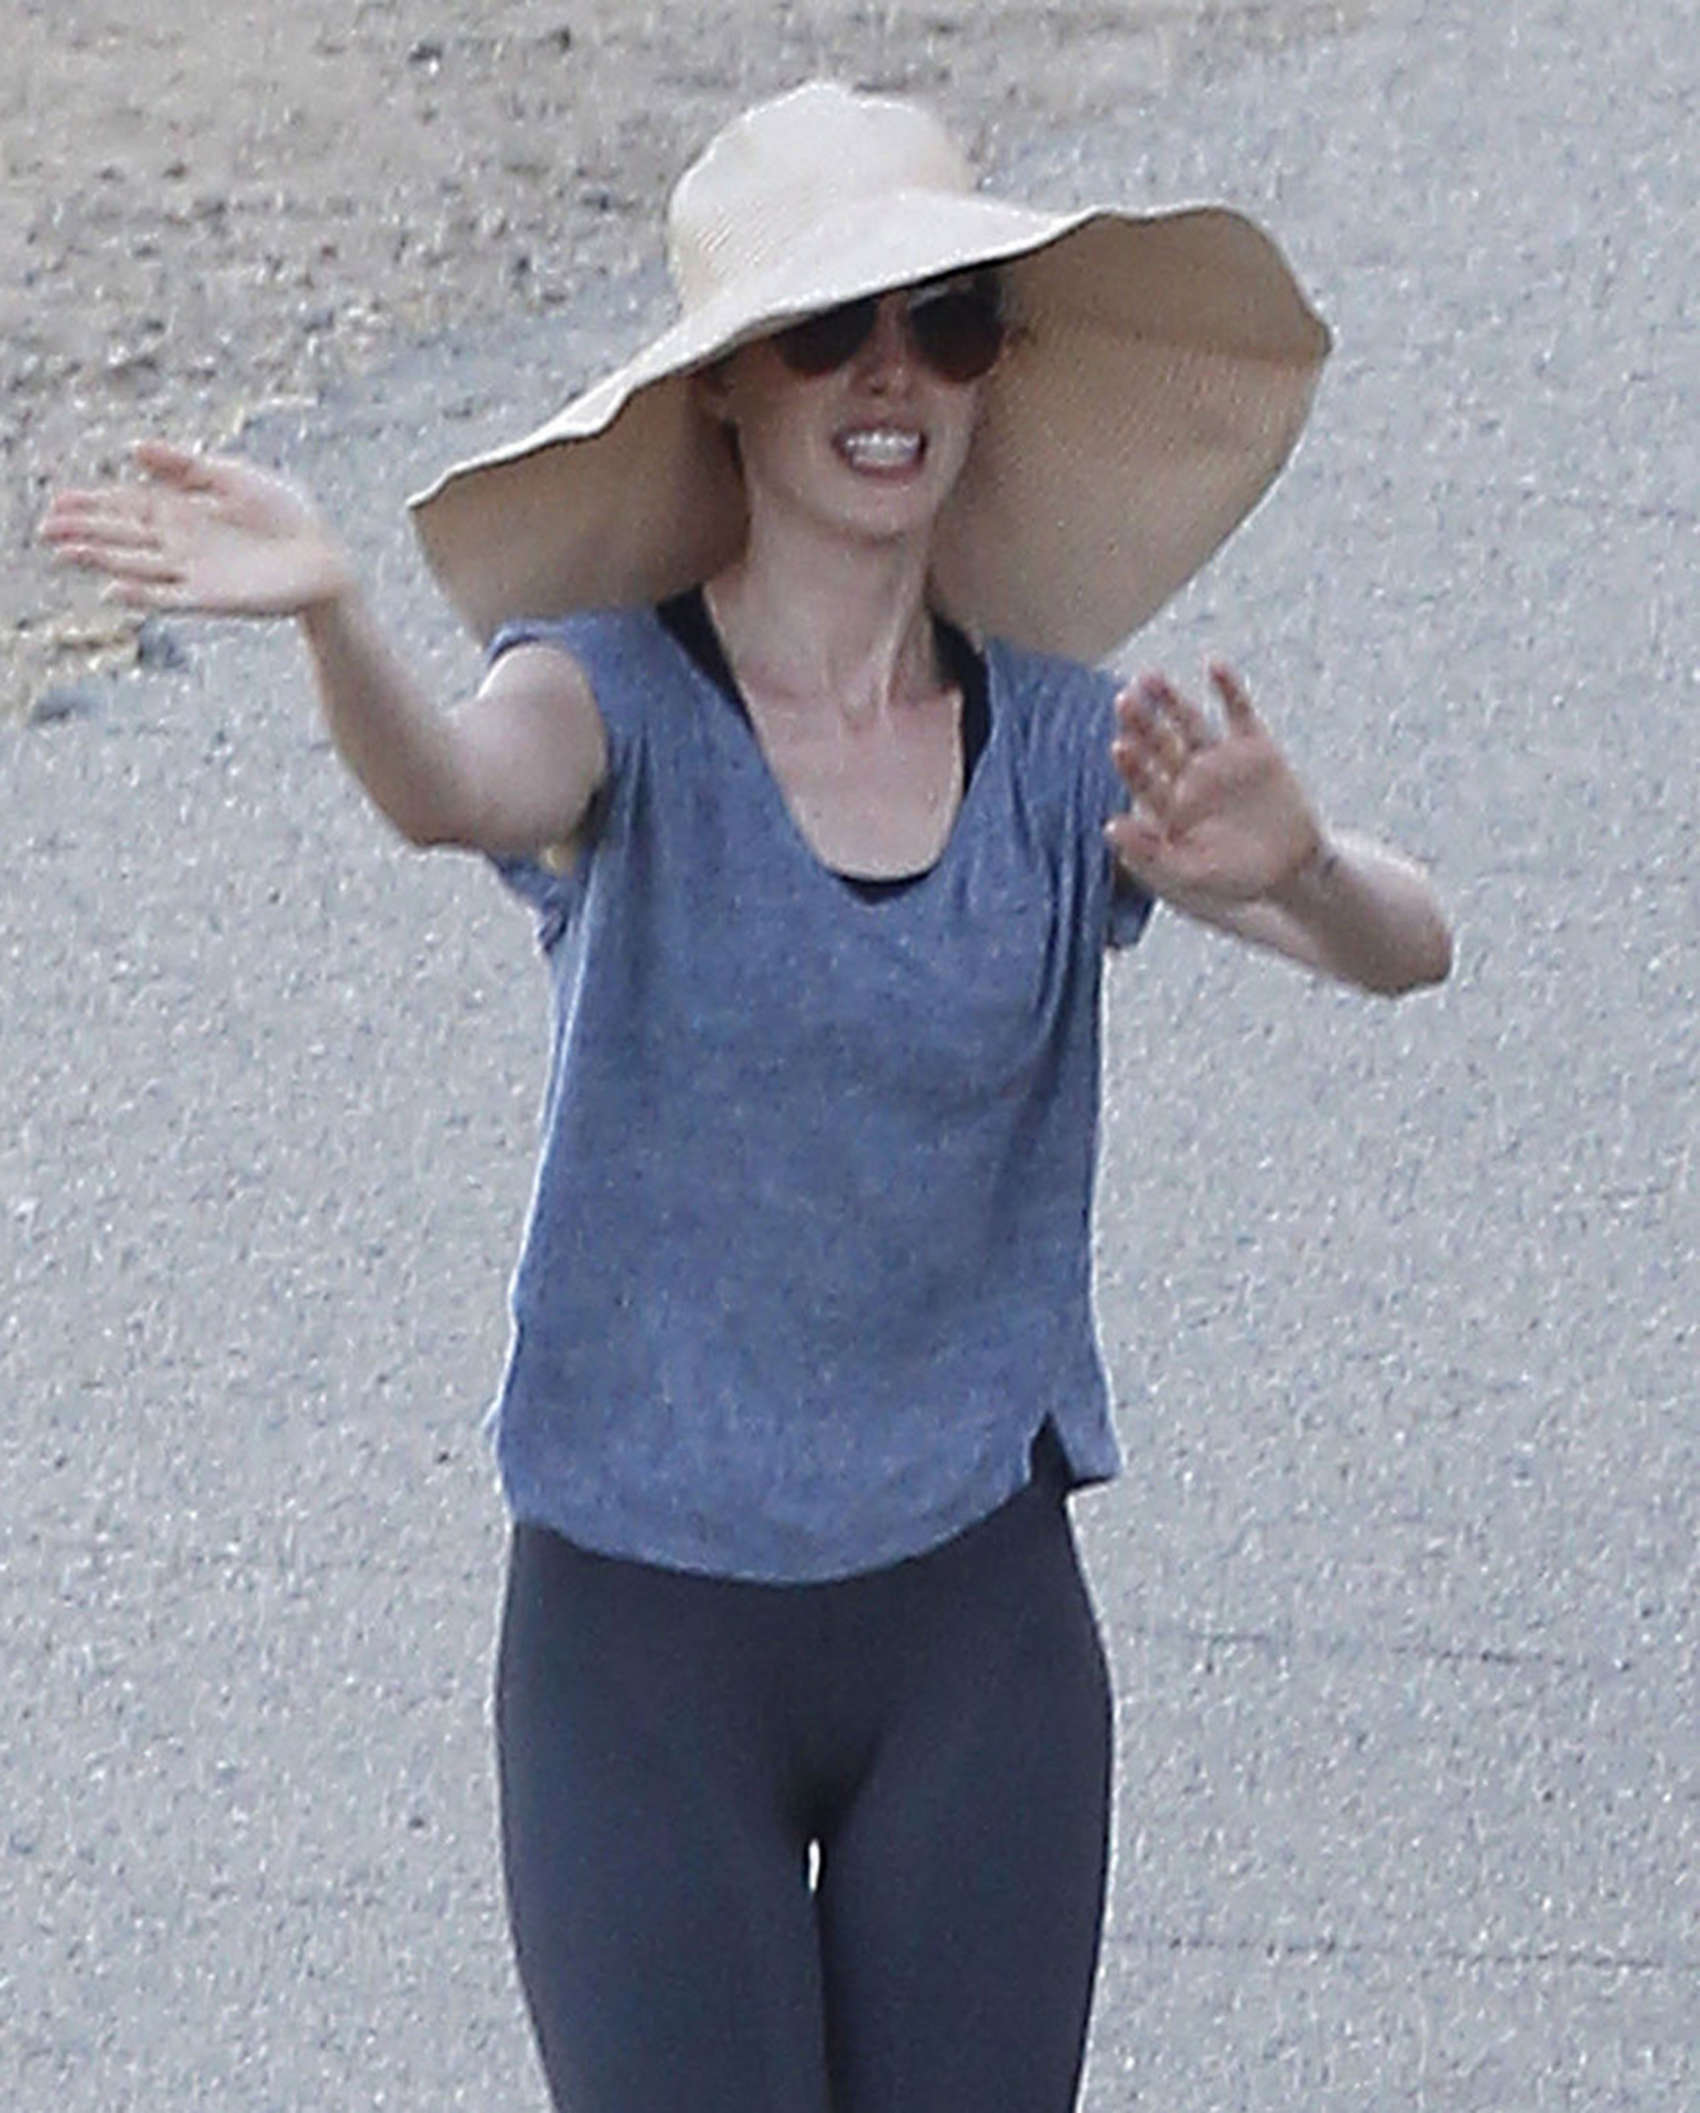 Anne Hathaway out and about candids in Los Angeles